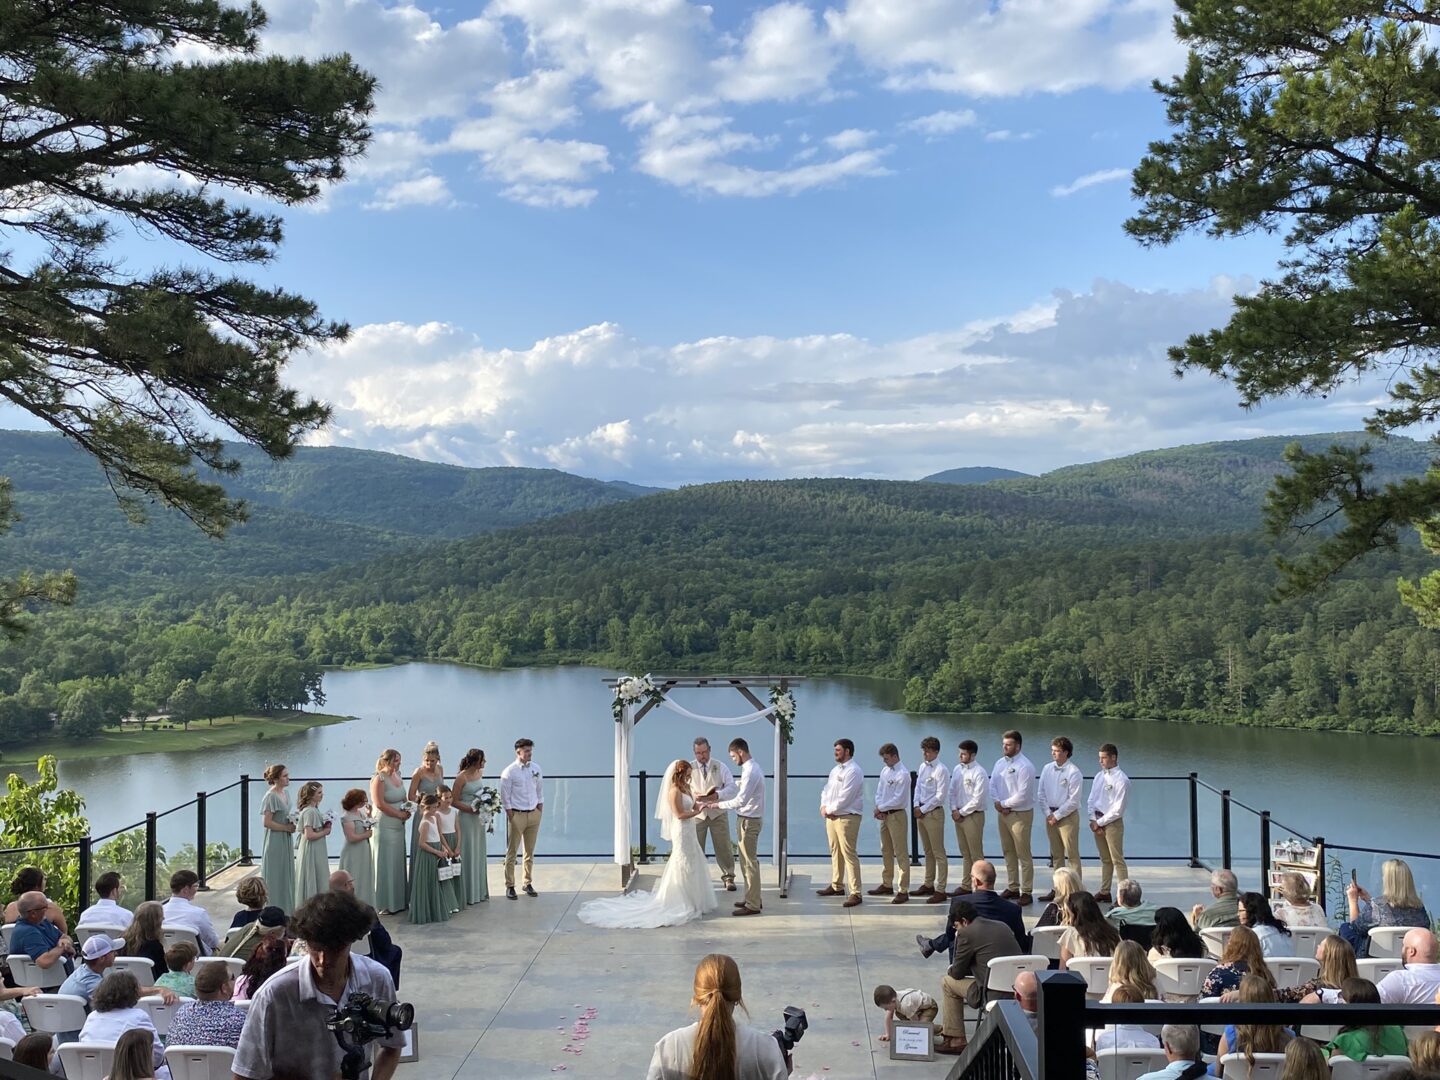 A wedding ceremony with a view of the lake.